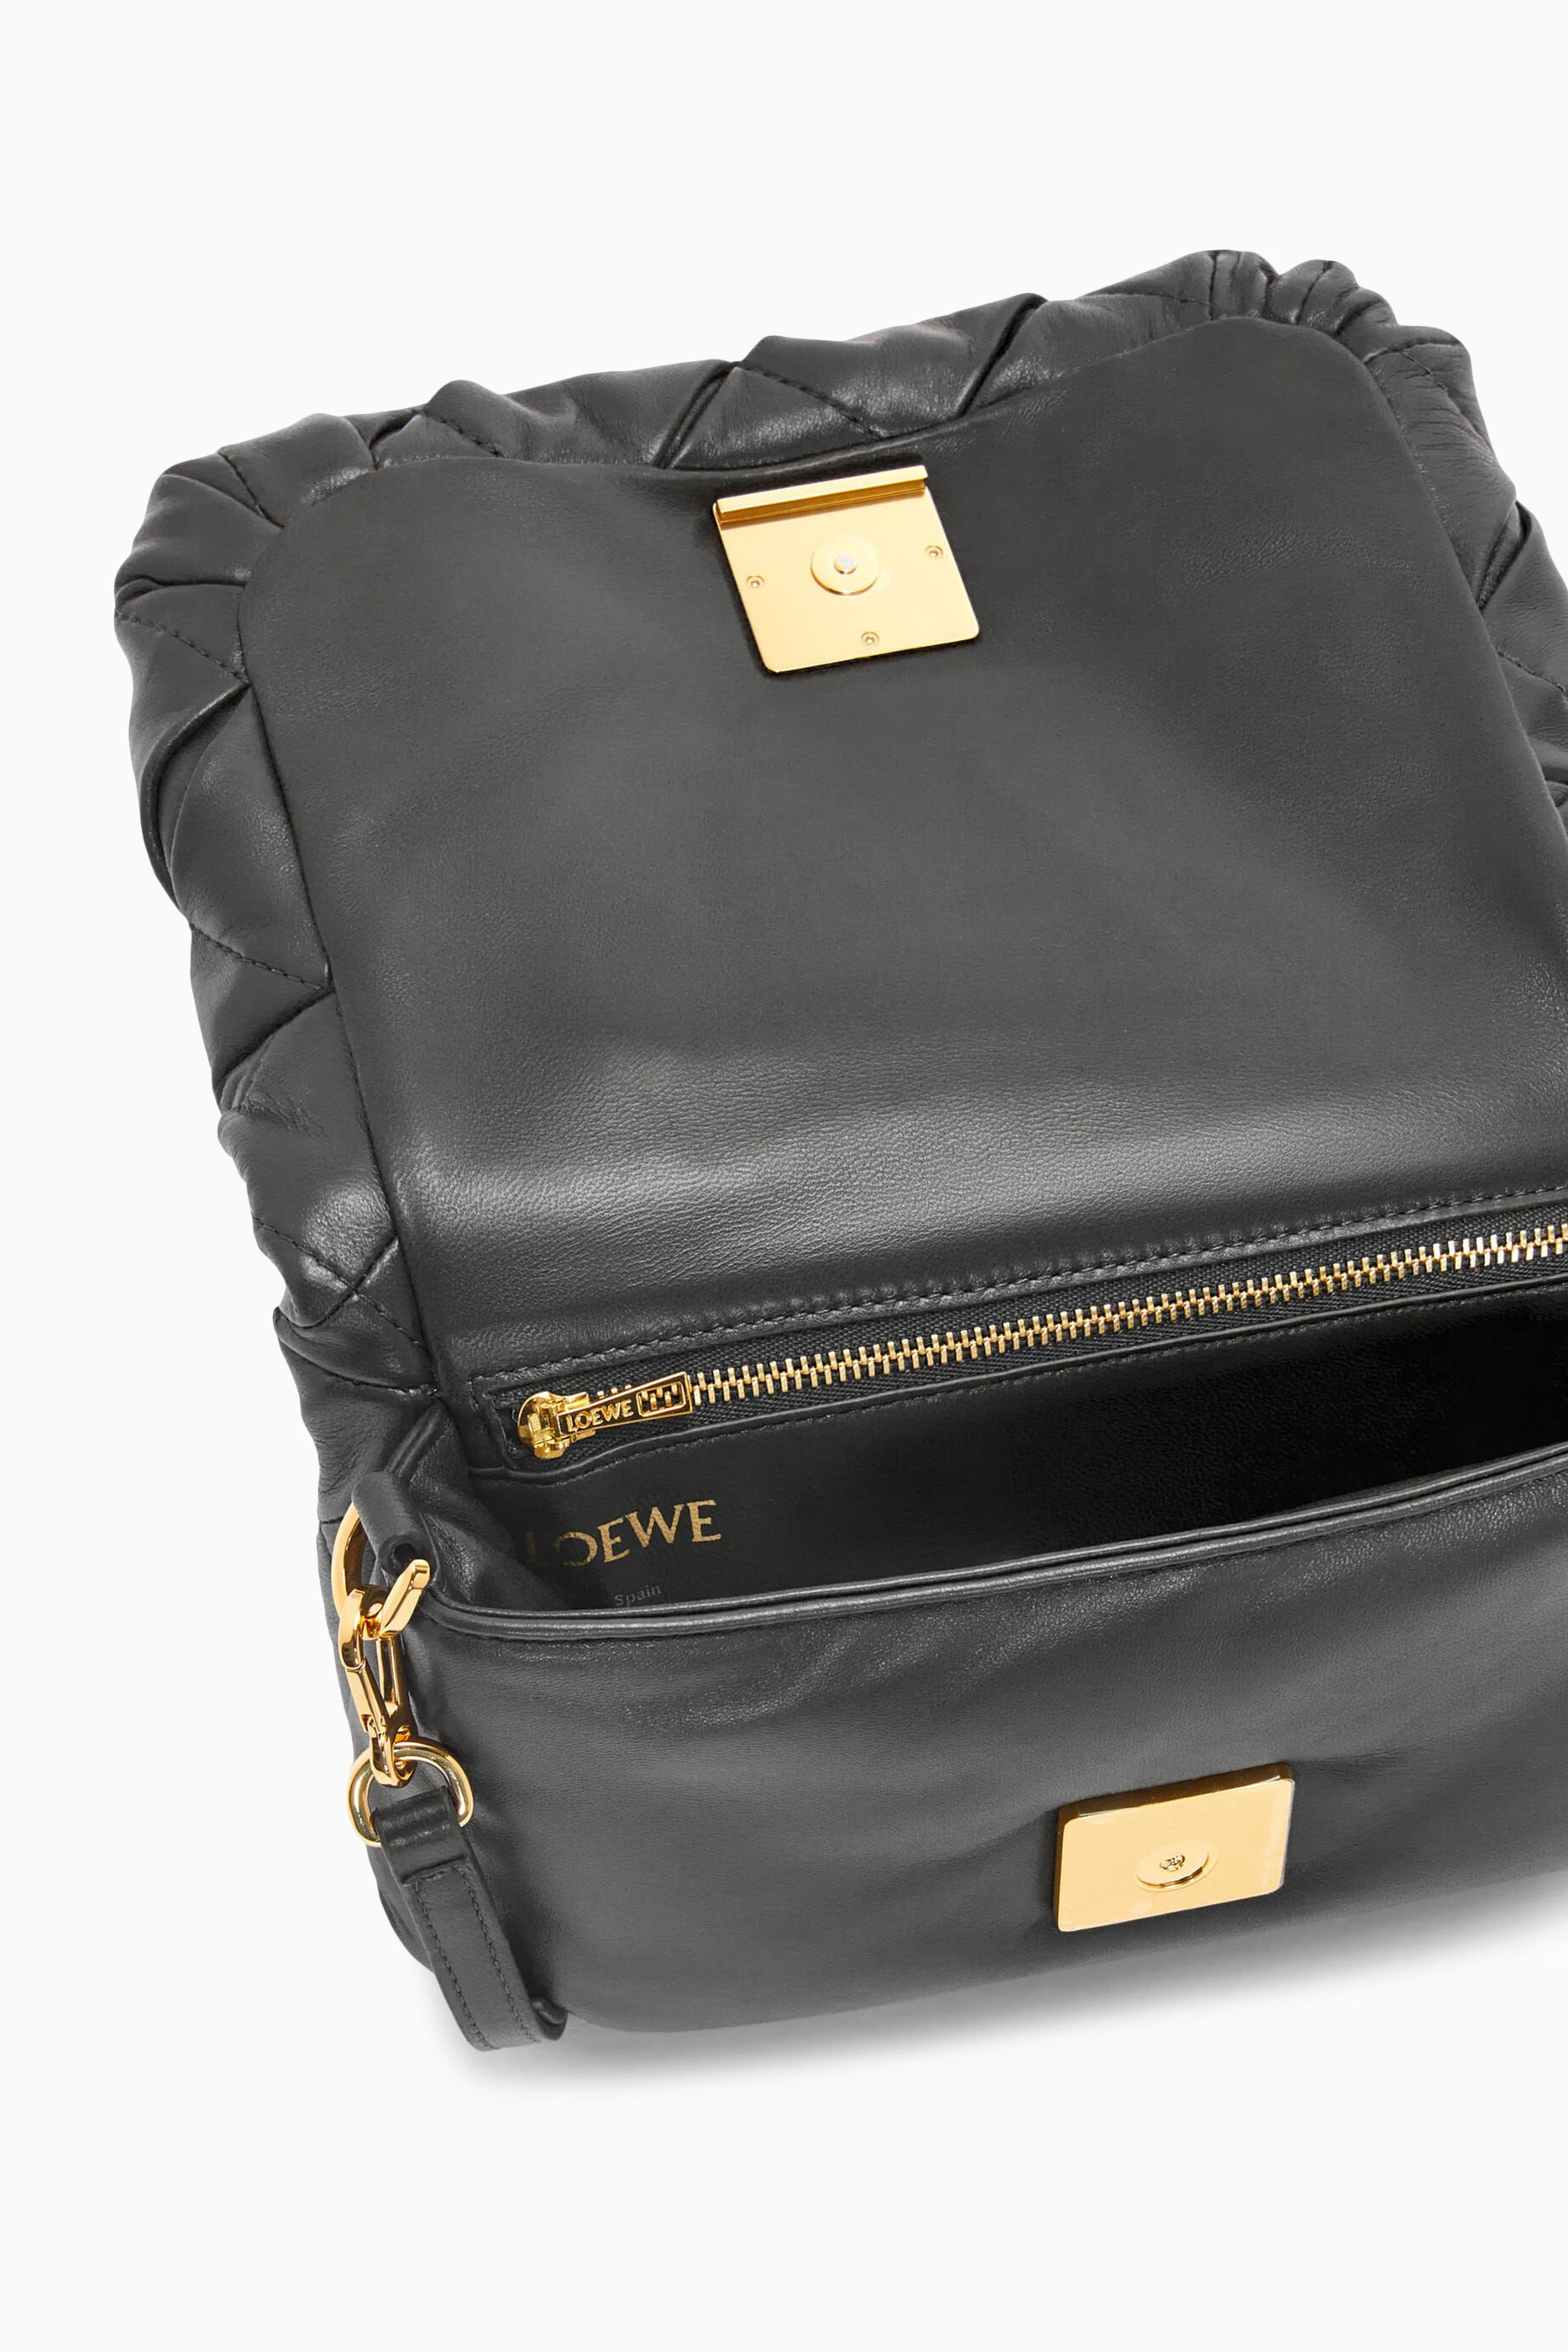 Buy Loewe Puffer Goya bag in black shiny nappa lambskin at the Park Avenue  boutique. Loewe Puffer Goya bag in black shiny nappa lambskin from the best  world brands with delivery across